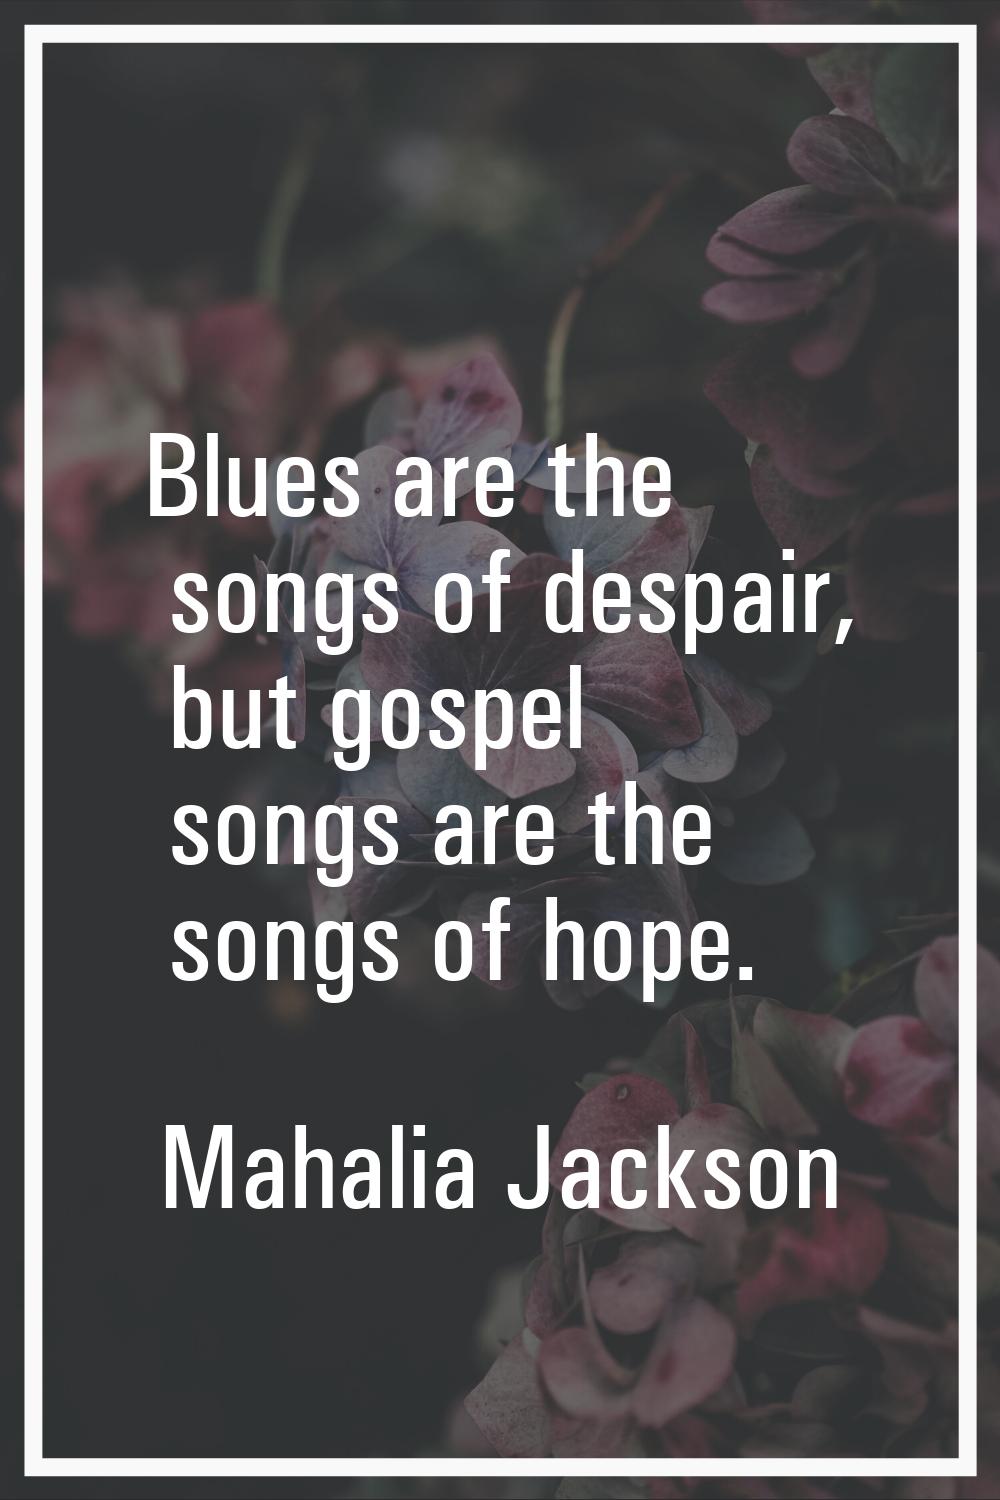 Blues are the songs of despair, but gospel songs are the songs of hope.